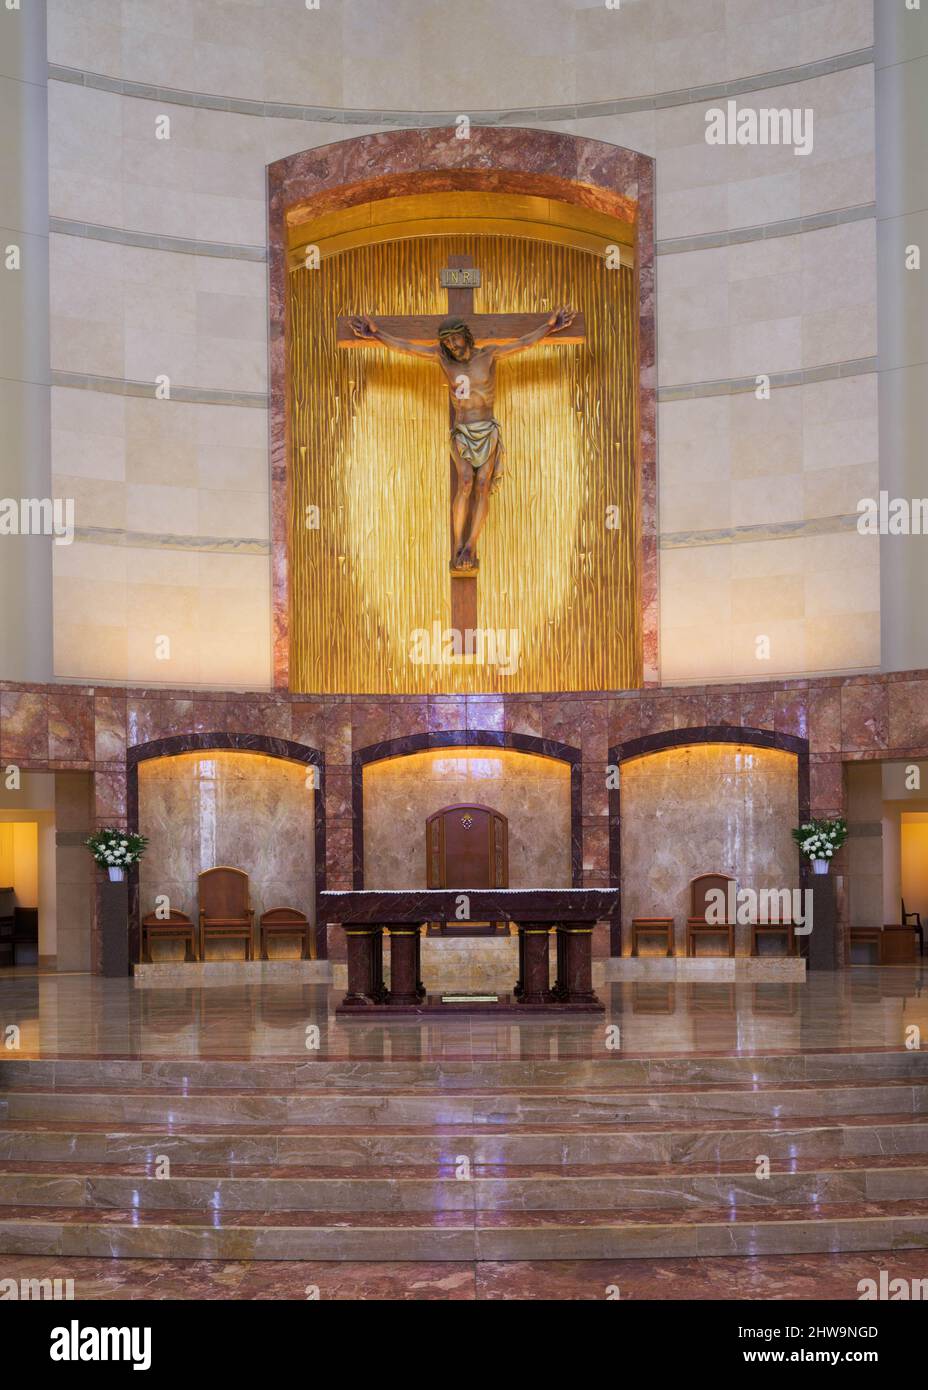 Crucifix above the altar in the sanctuary of the historic Co-Cathedral of the Sacred Heart at 1111 St Joseph Pkwy in Houston, Texas Stock Photo